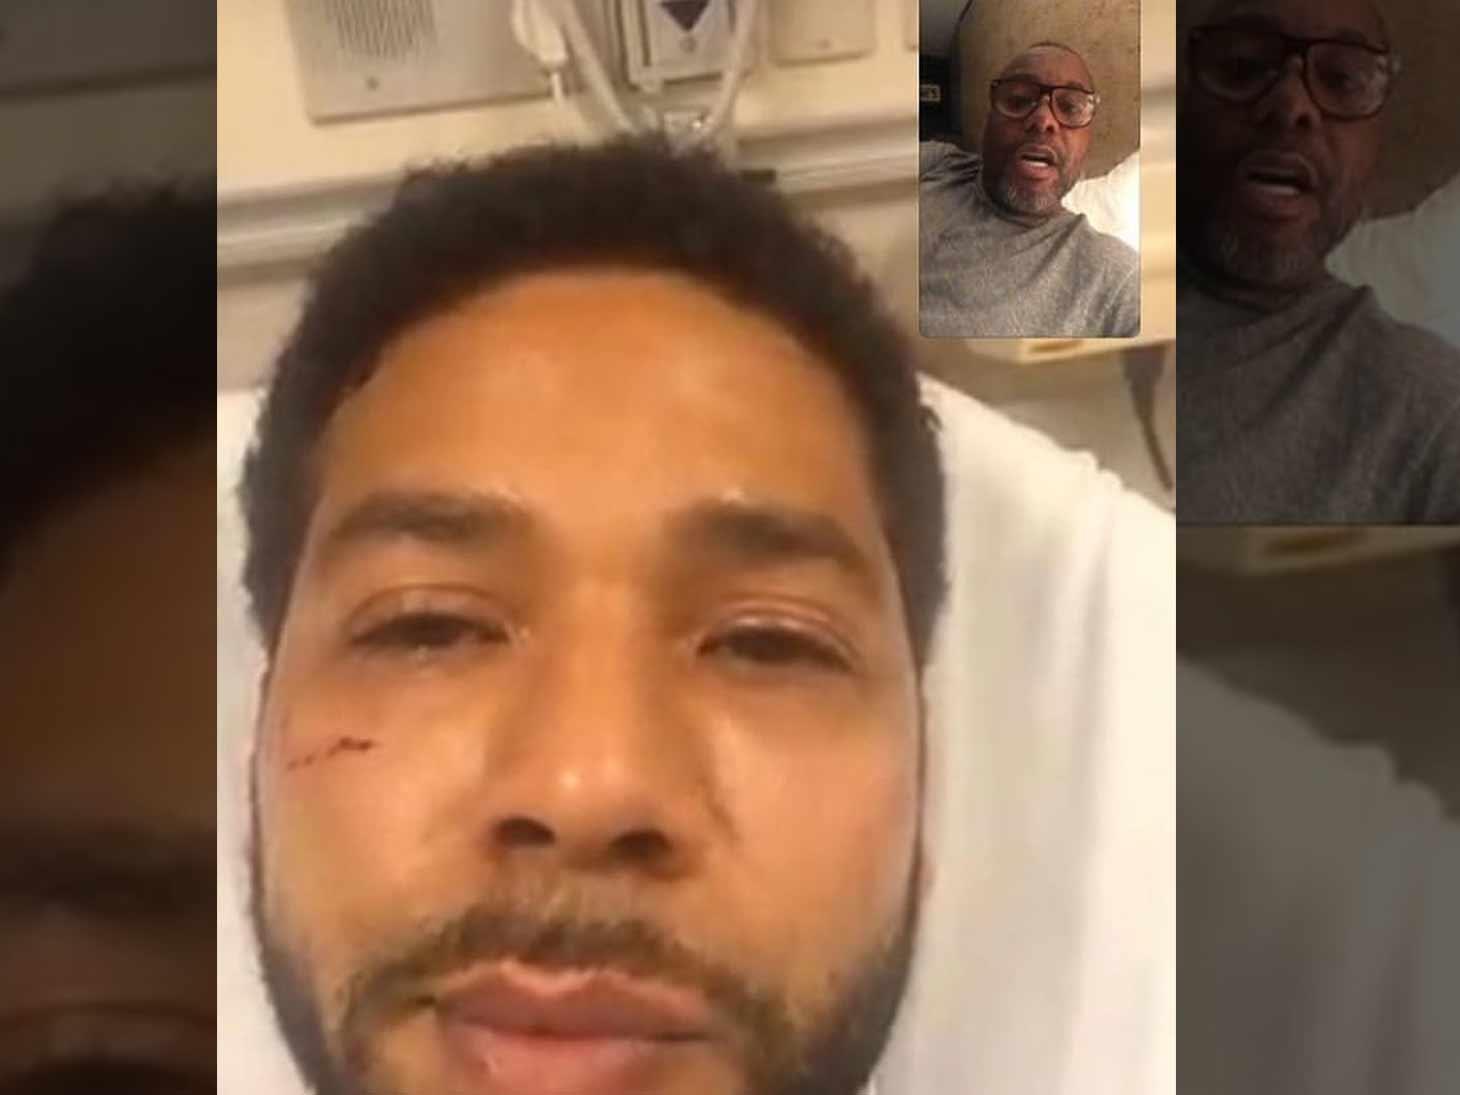 Jussie Smollett Seen with Facial Injuries in First Time Since Vicious Attack